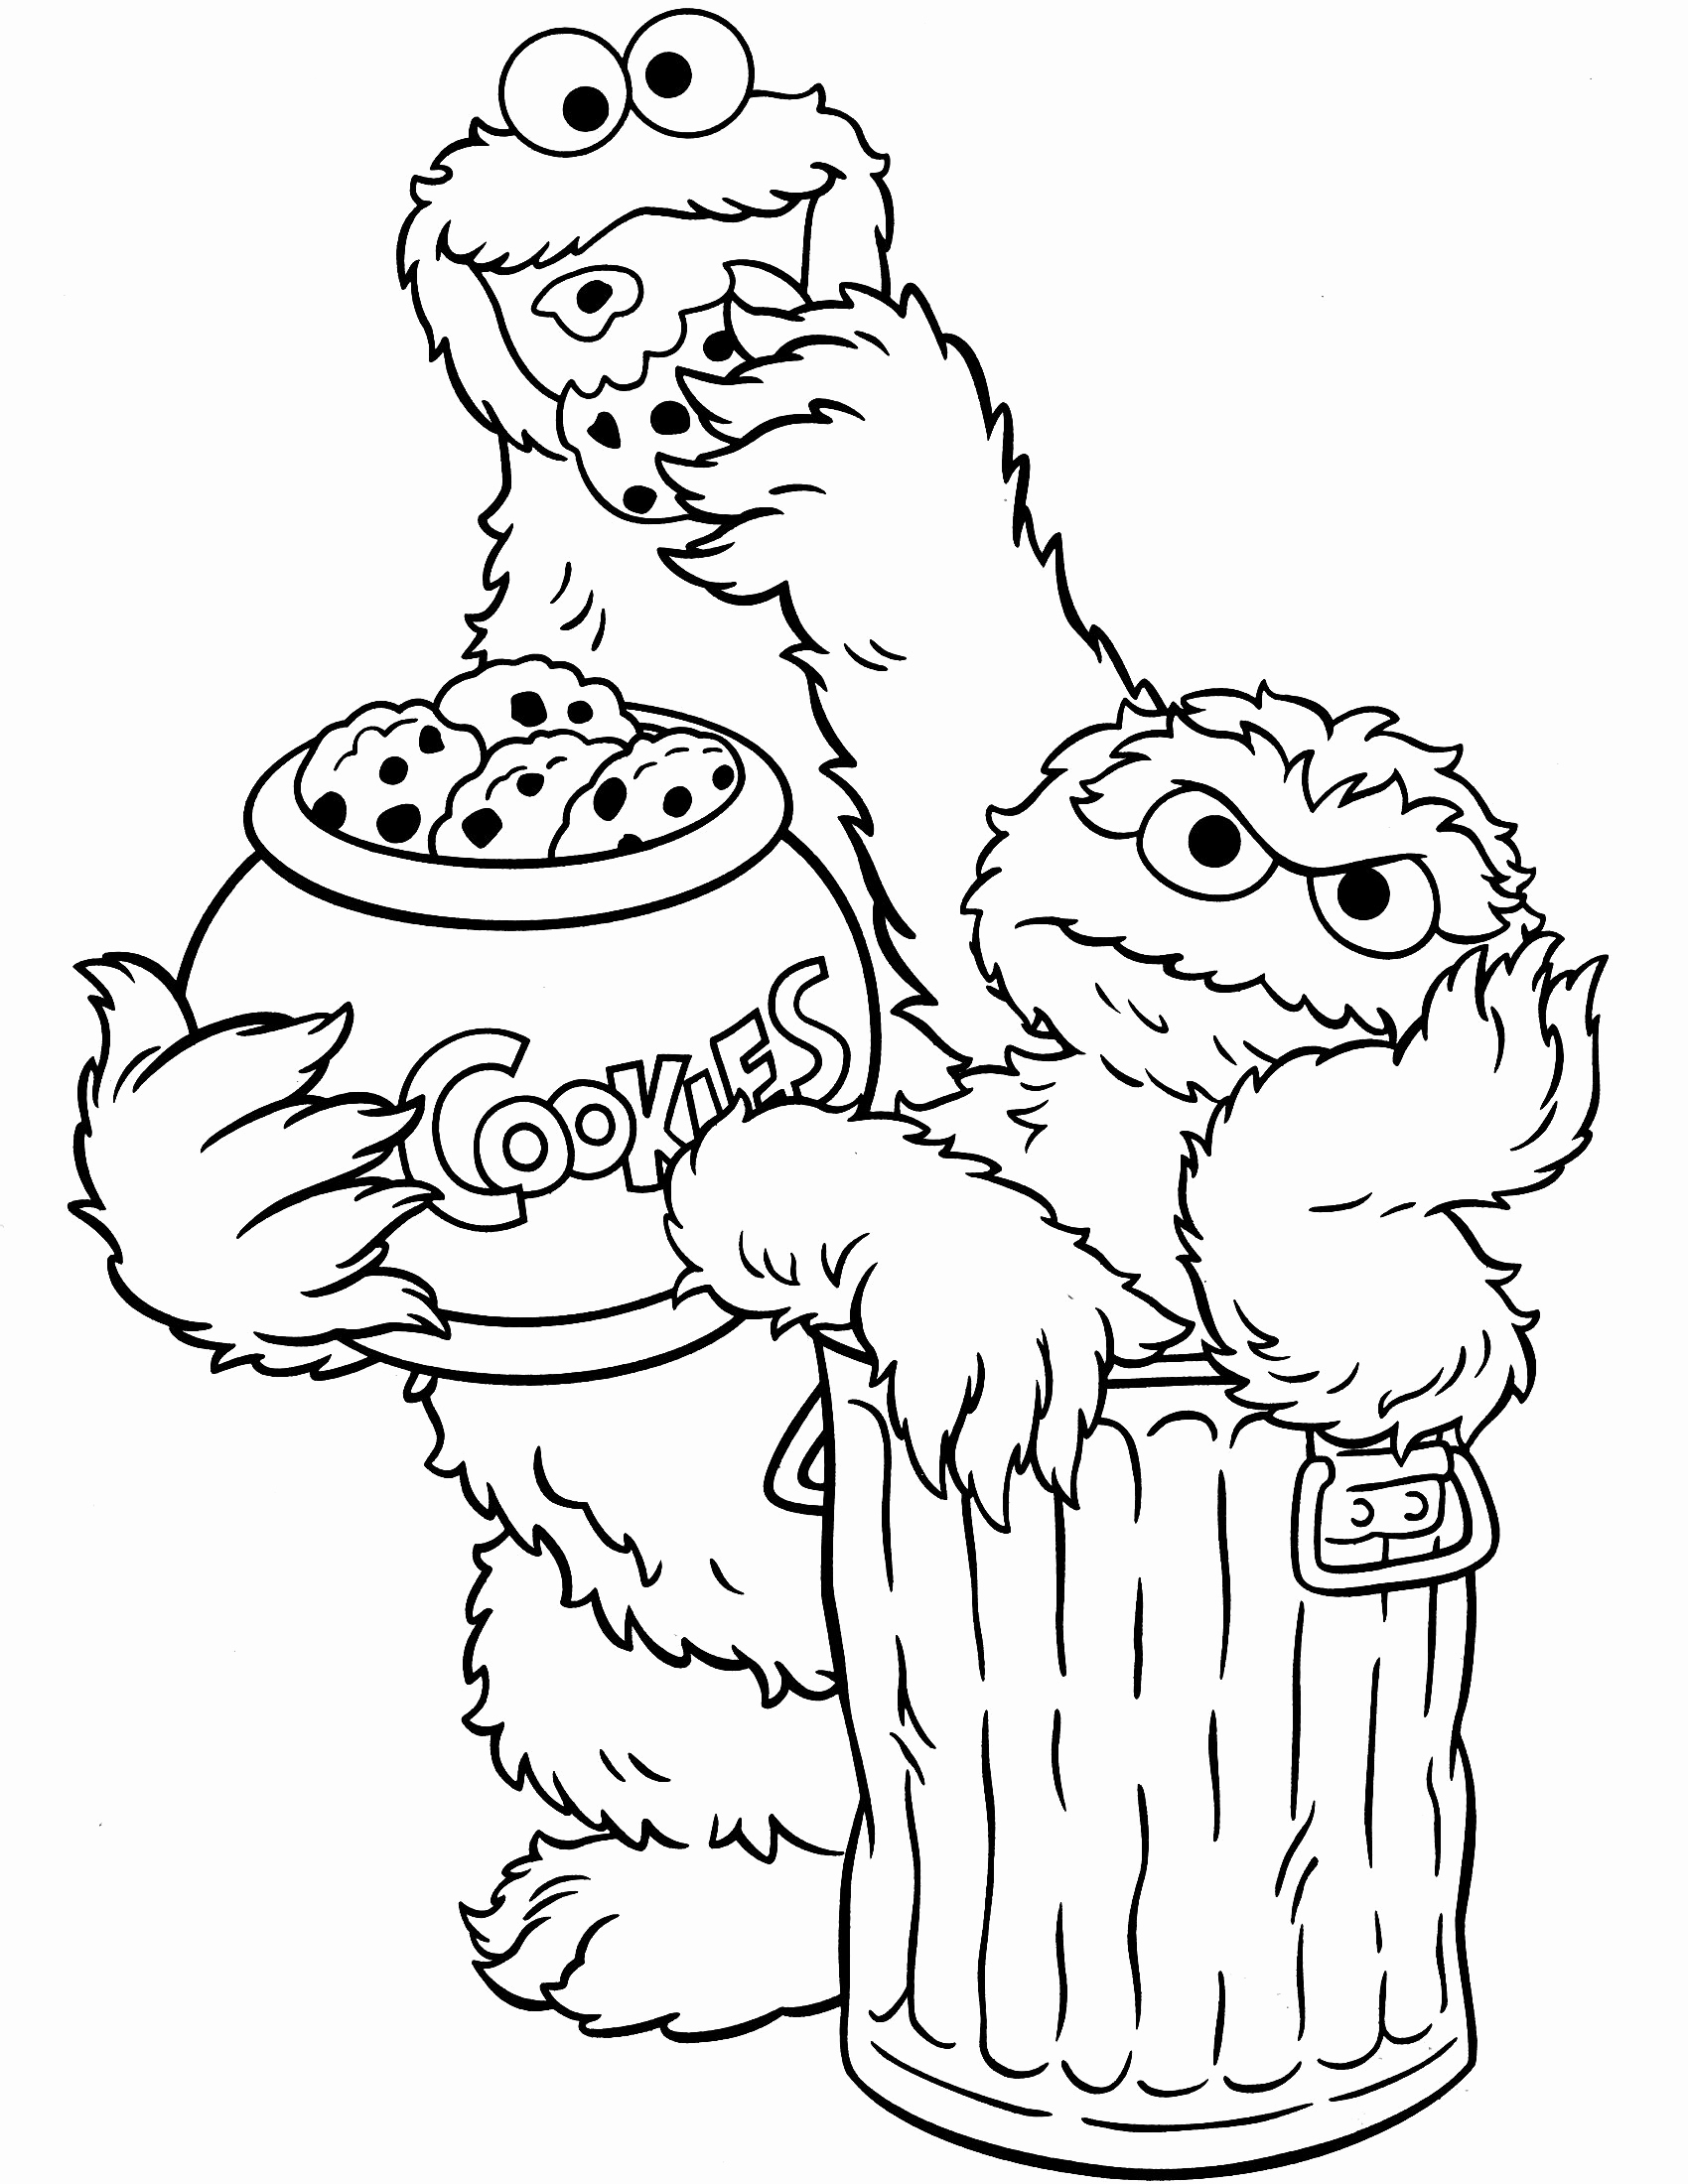 Sesame Street Ernie Character Coloring Pages Coloring Pages